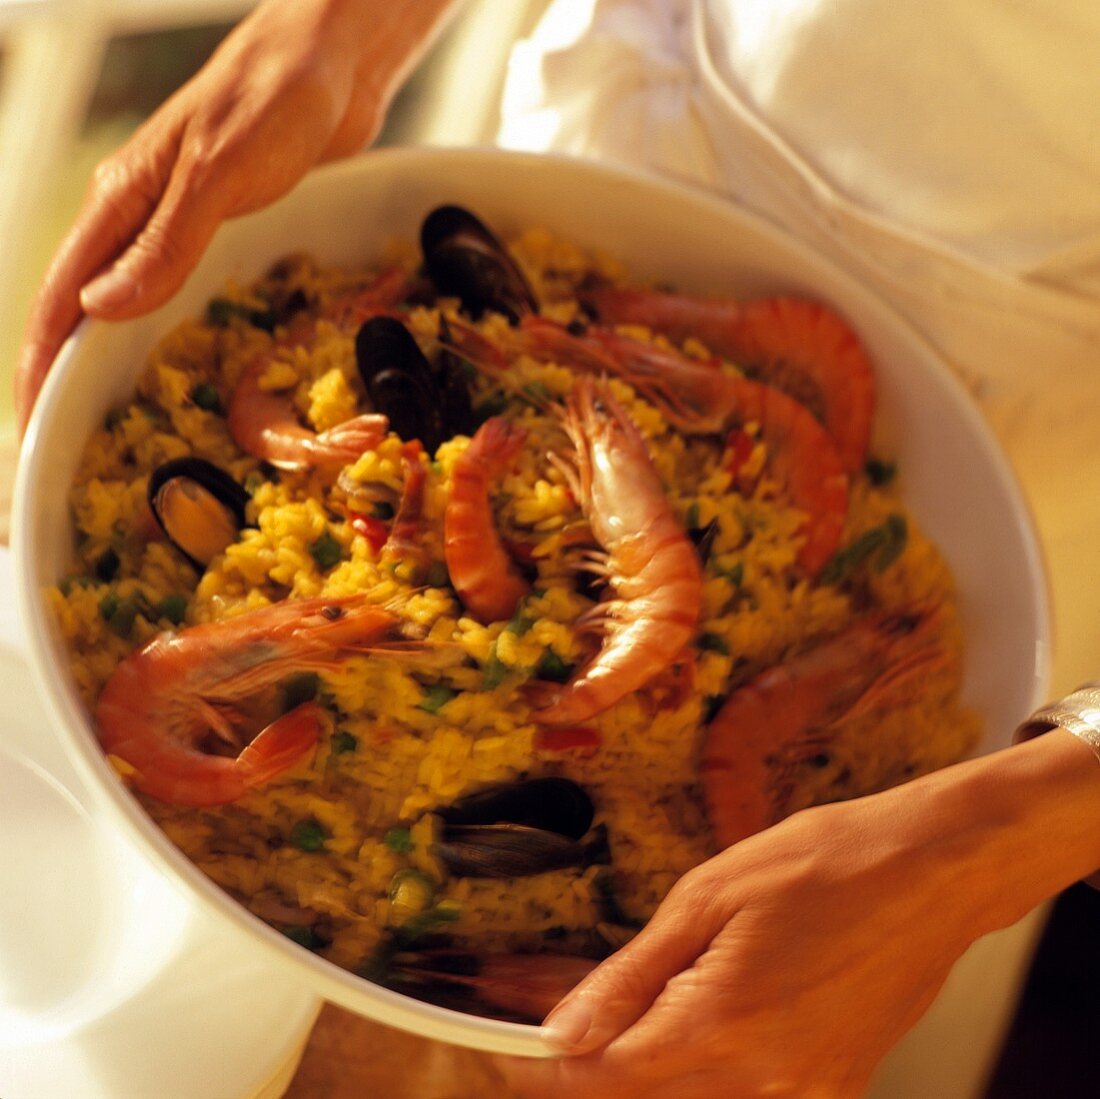 Hands holding a dish of paella